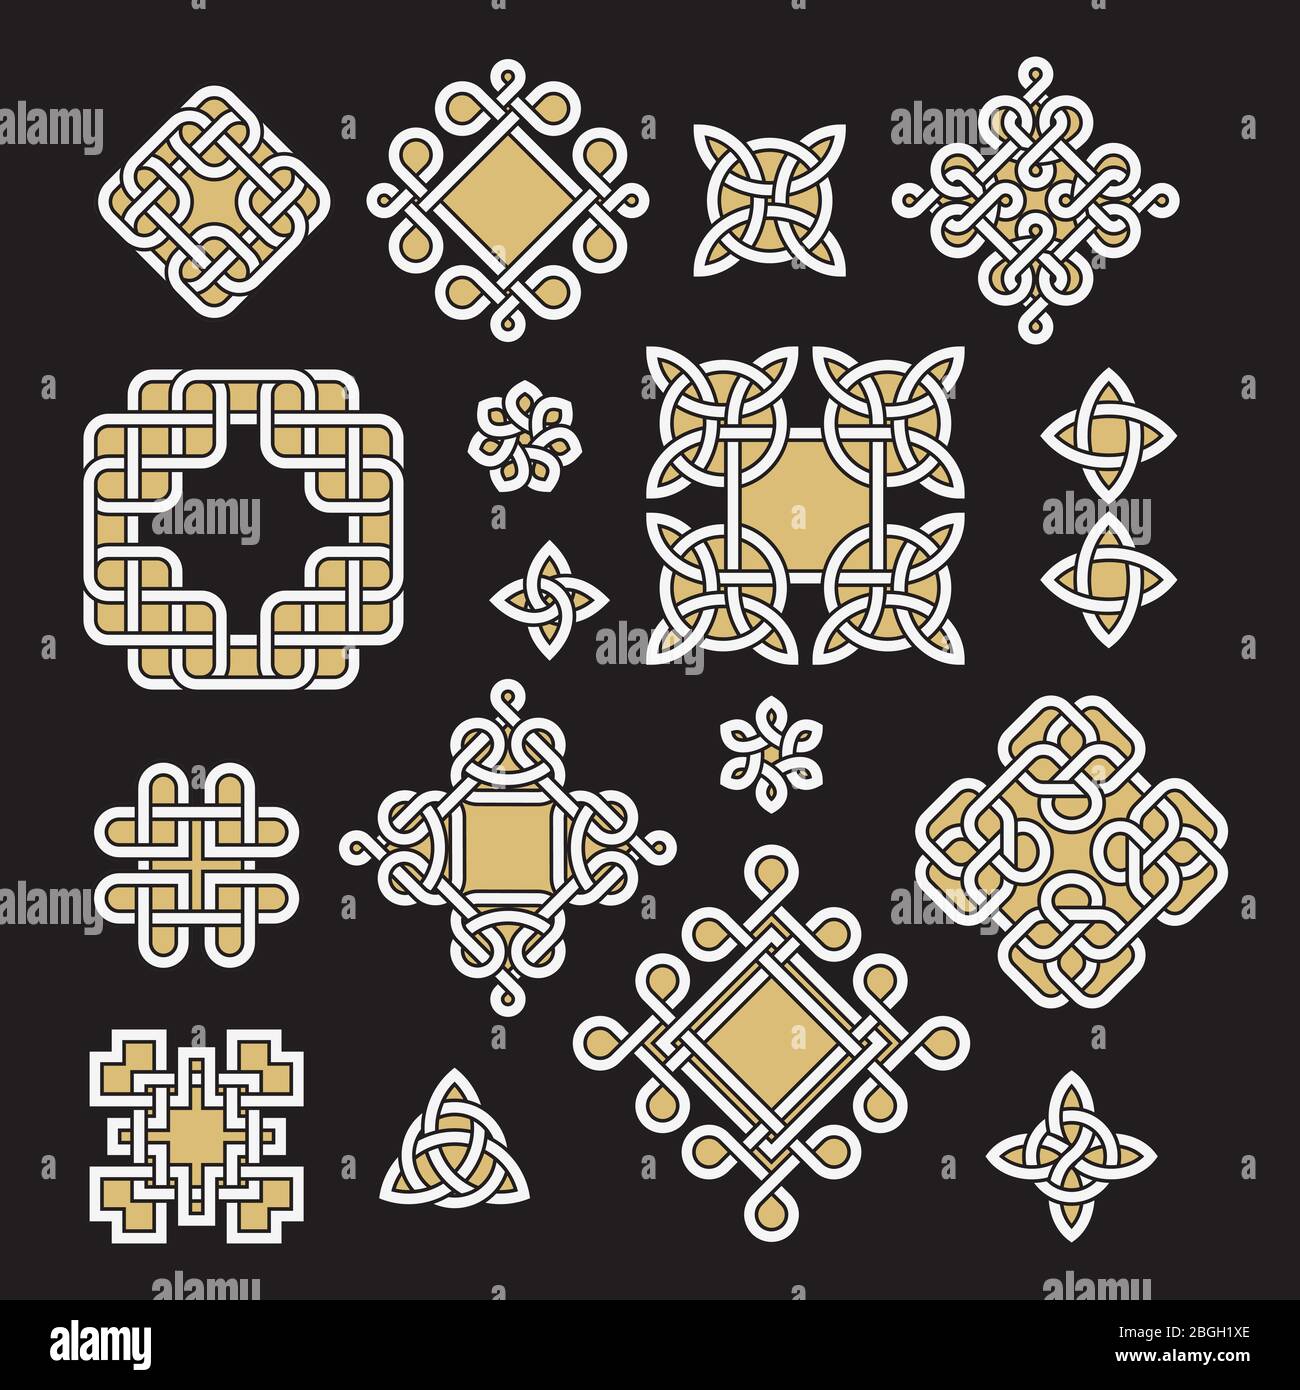 Chinese and celtic endless knots and patterns vector set. Black, white and gold decorative ornate elements illustration Stock Vector